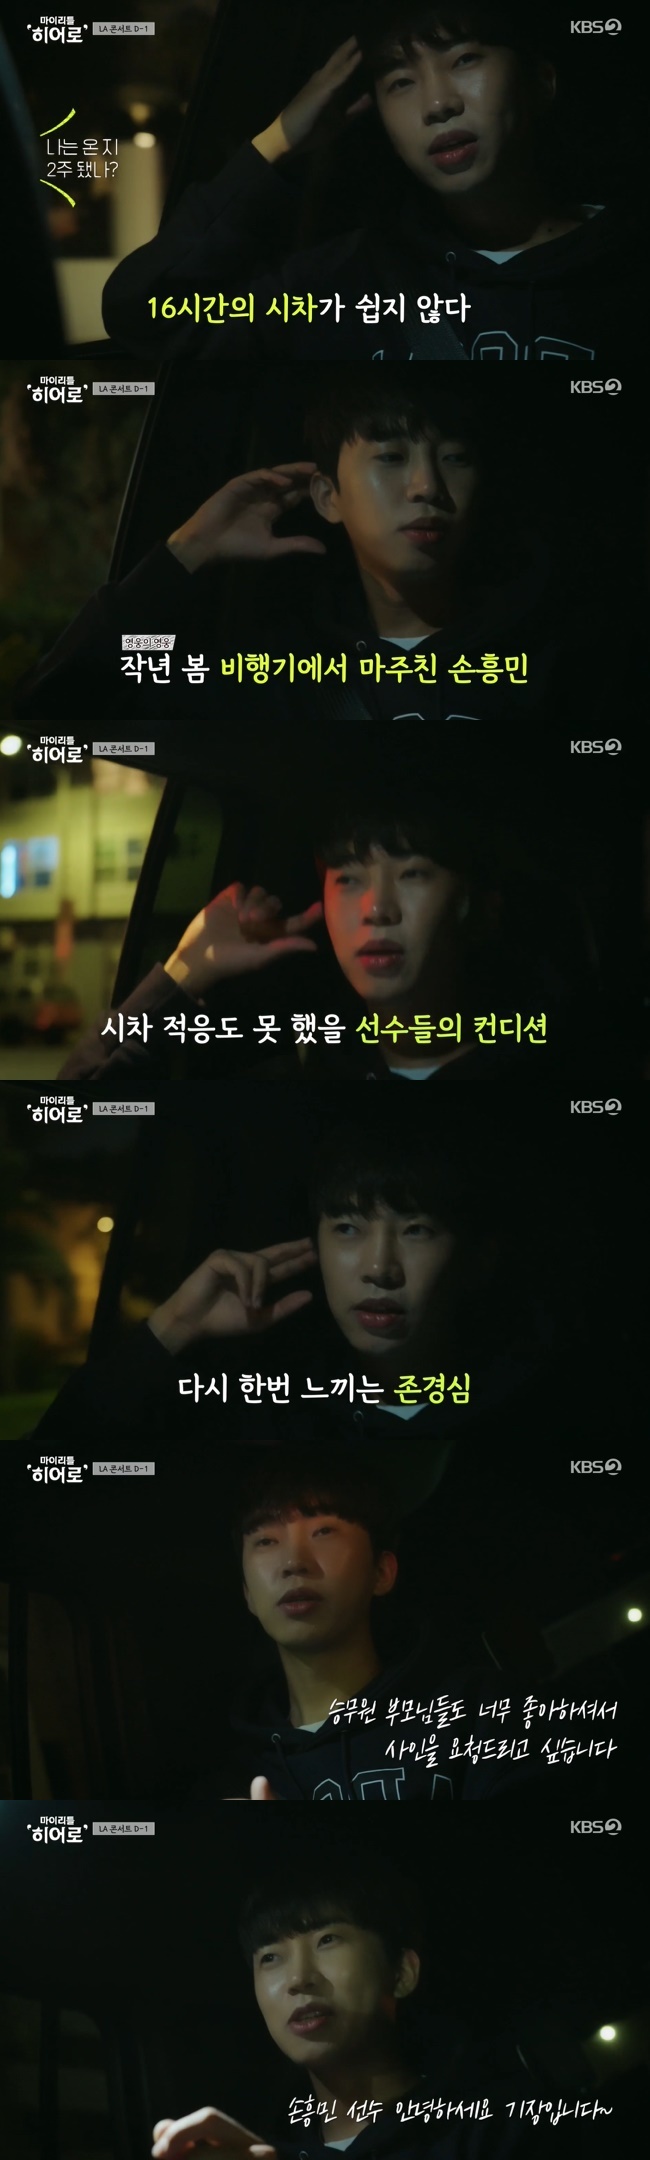 Lim Young-woong revealed the story of Son Heung-min and Planes.On June 3, the day before the concert, Lim Young-woongs appearance was revealed on KBS 2TV Lim Young-woongs exclusive reality show  ⁇  My Little Hero ⁇  (MY LITTLE HERO).Lim Young-woong, who stayed at the hotel alone the day before performance to concentrate on the performance, moved for rehearsals.Concert Lim Young-woong, who entered the United States five days ago, was ambiguous if he had come about  ⁇ 3 days earlier. It was very appropriate for about 5 days. Parallax Adaptation was not easy.Lim Young-woong said, Every time we do Parallax Adaptation, soccer players feel great. He mentioned Son Heung-min as our son.Lim Young-woong revealed an episode in which he met Son Heung-min in Planes, who was riding with Son Heung-min in Planes returning from London the other day.Baro The next day was the national representative Kyonggi. It does not make sense. I do not play Parallax Adaptation and play Baro game. I tried Parallax Adaptation like this.However, it is really Respectful to show such Kyonggi power.Lim Young-woong shared a pleasant experience in Planes. Lim Young-woong was returning from a rest in Planes, and a stewardess handed him a piece of paper.I read it because it was written, and it was Proso millets hand letter. ⁇  When my country was suffering from COVID-19, I comforted the people and I was so respectful and thankful.  ⁇   ⁇  I asked for a sign politely.  ⁇   ⁇  I also wrote a long letter and finished signing about 10 pages.I opened the back and there was a letter saying  ⁇ Son Heung-min, hello Proso millet  ⁇ .